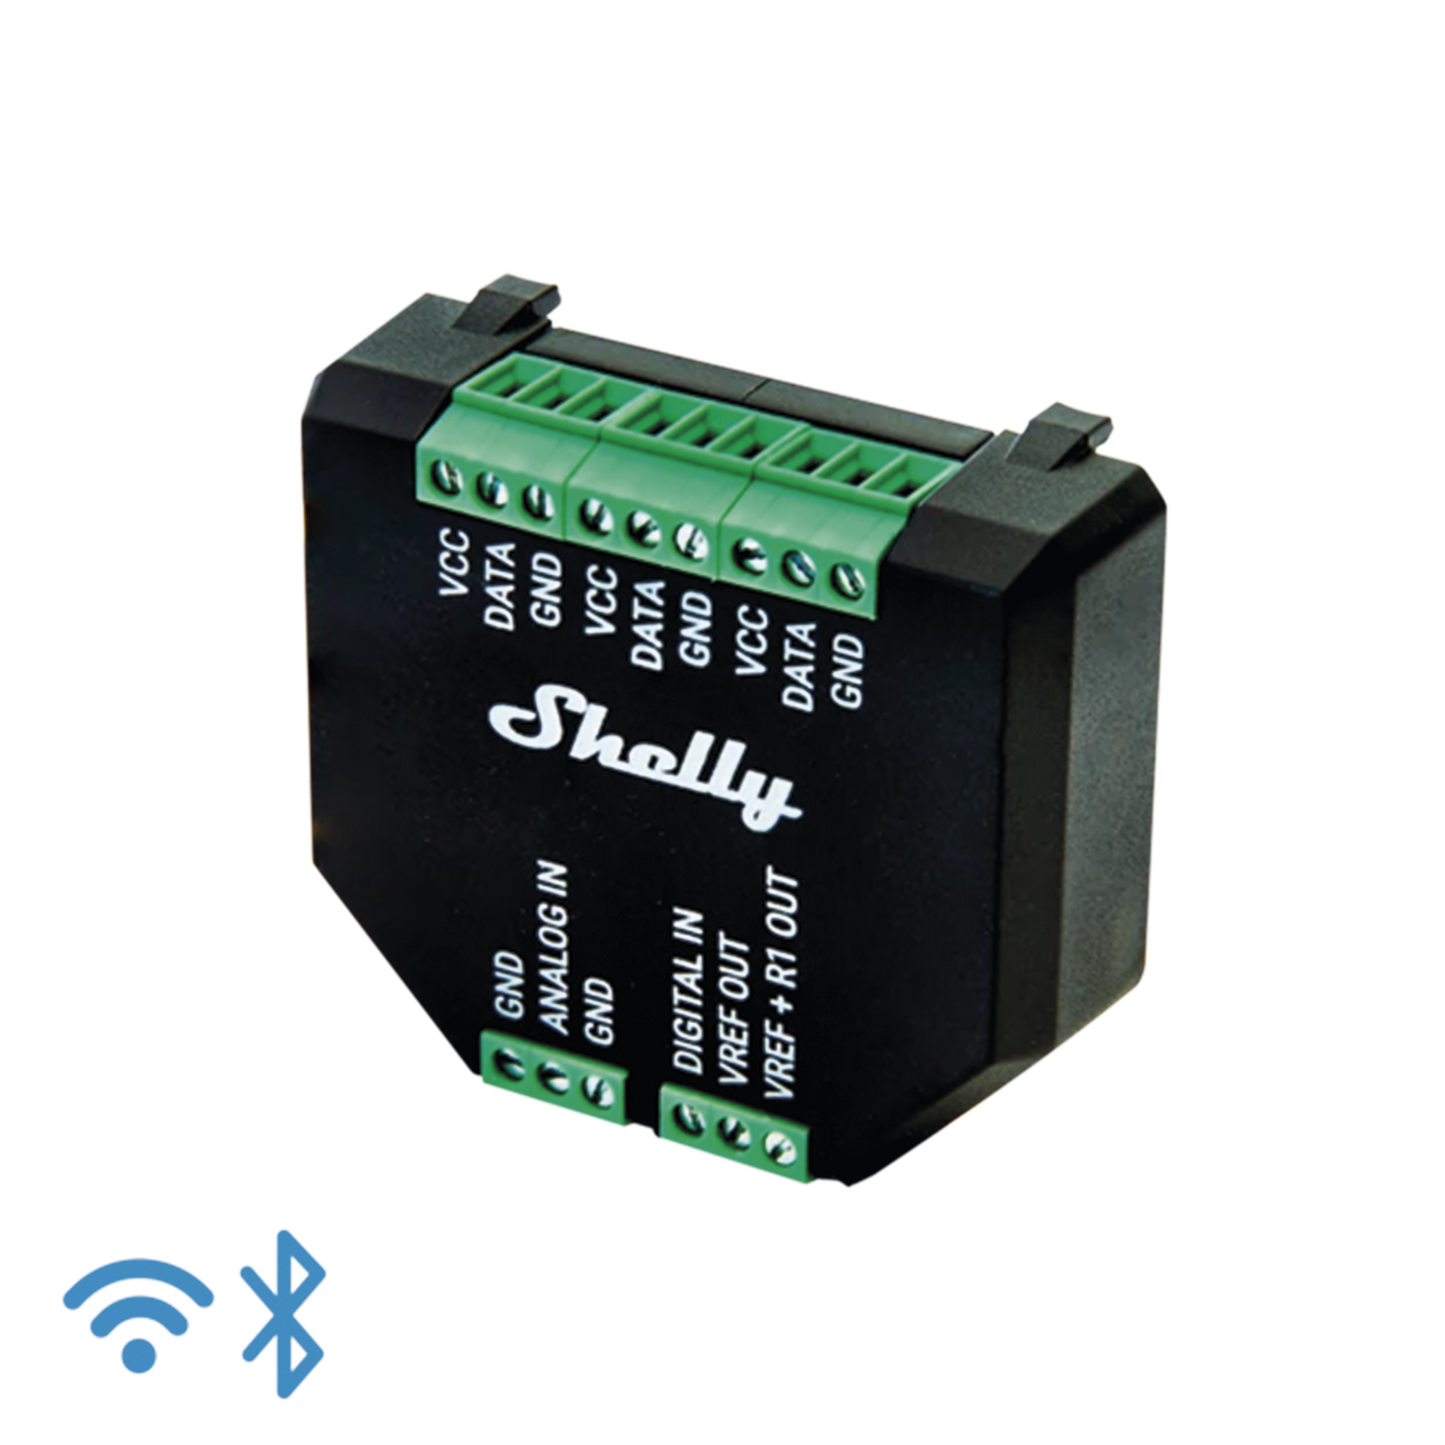 Shelly Plus AddOn / Home Automation Expansion / FOR SHELLY PLUS RELAY